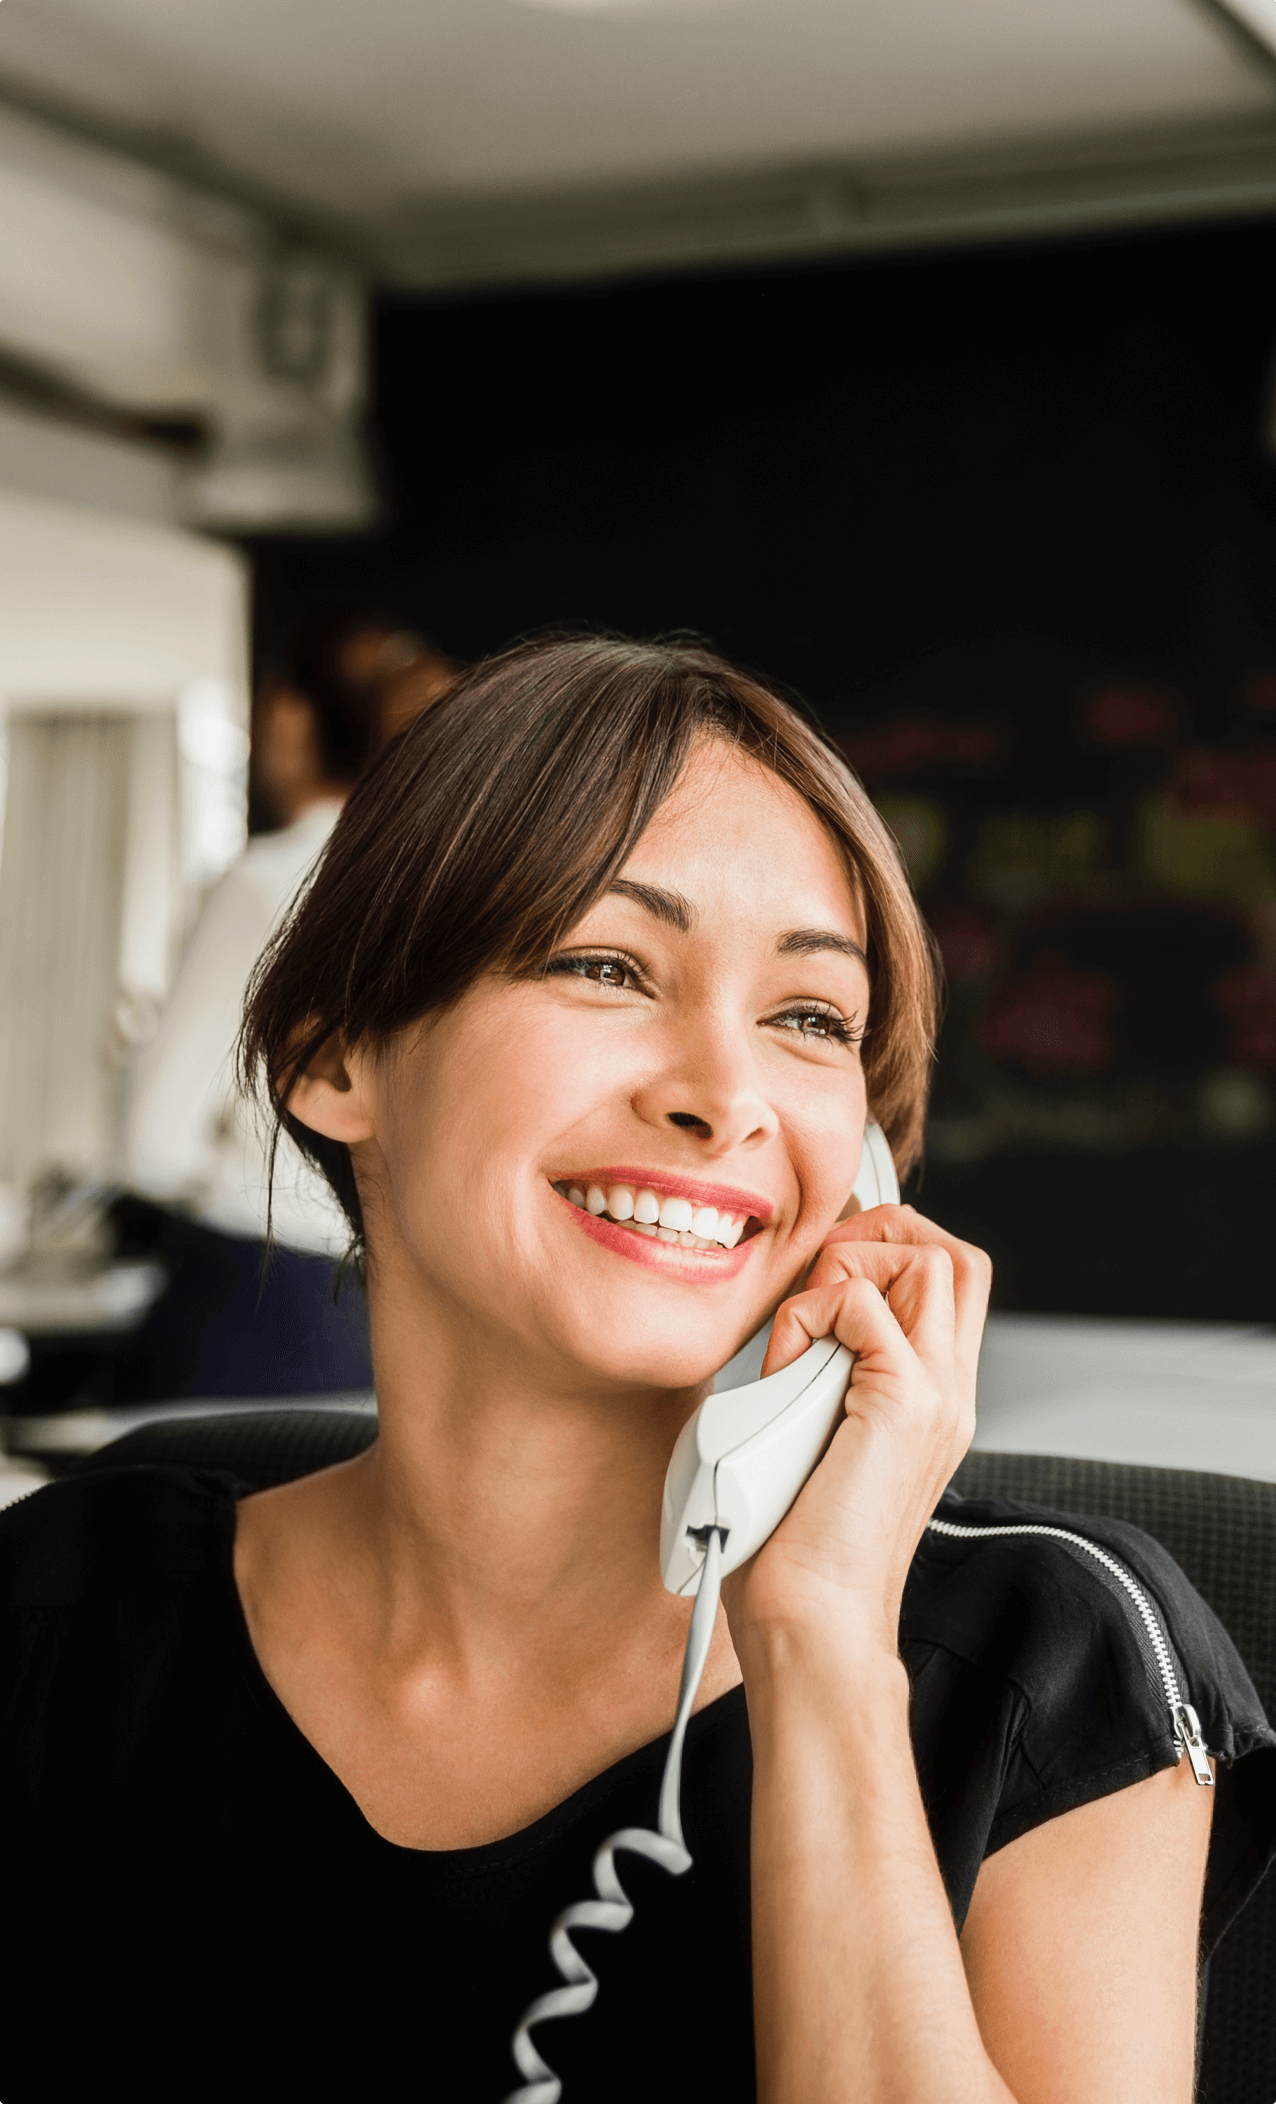 Cheerful businesswoman using telephone in office